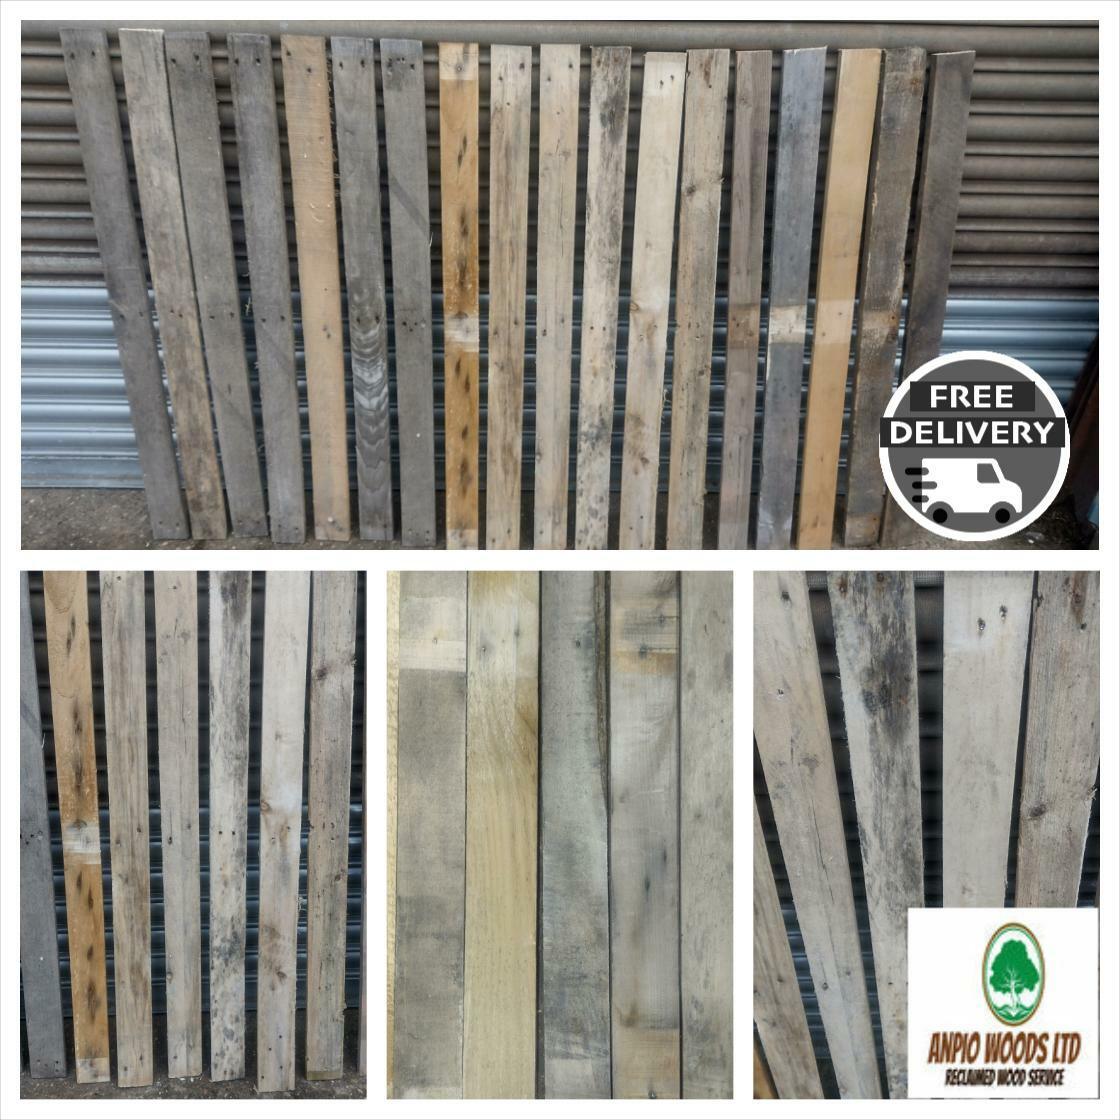 Reclaimed Distressed Wood Pallet Planks - Pack of 30 - Natural Patina - Easy Cladding - Multiple Project Uses - Anpio woods ltd